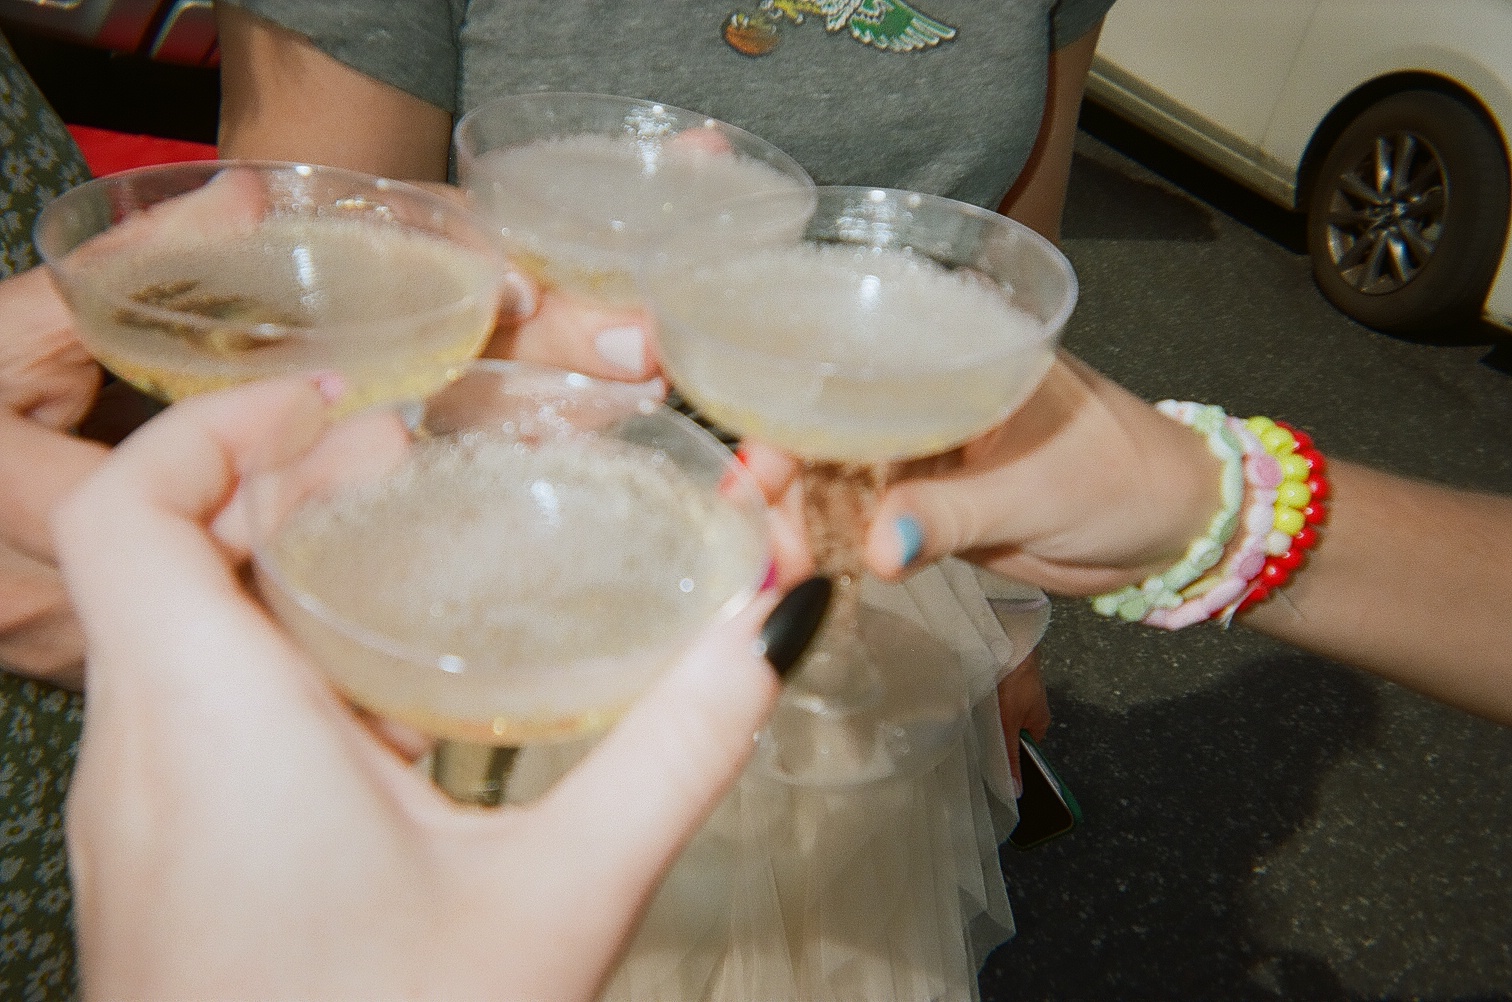 Four people toast with champagne glasses.